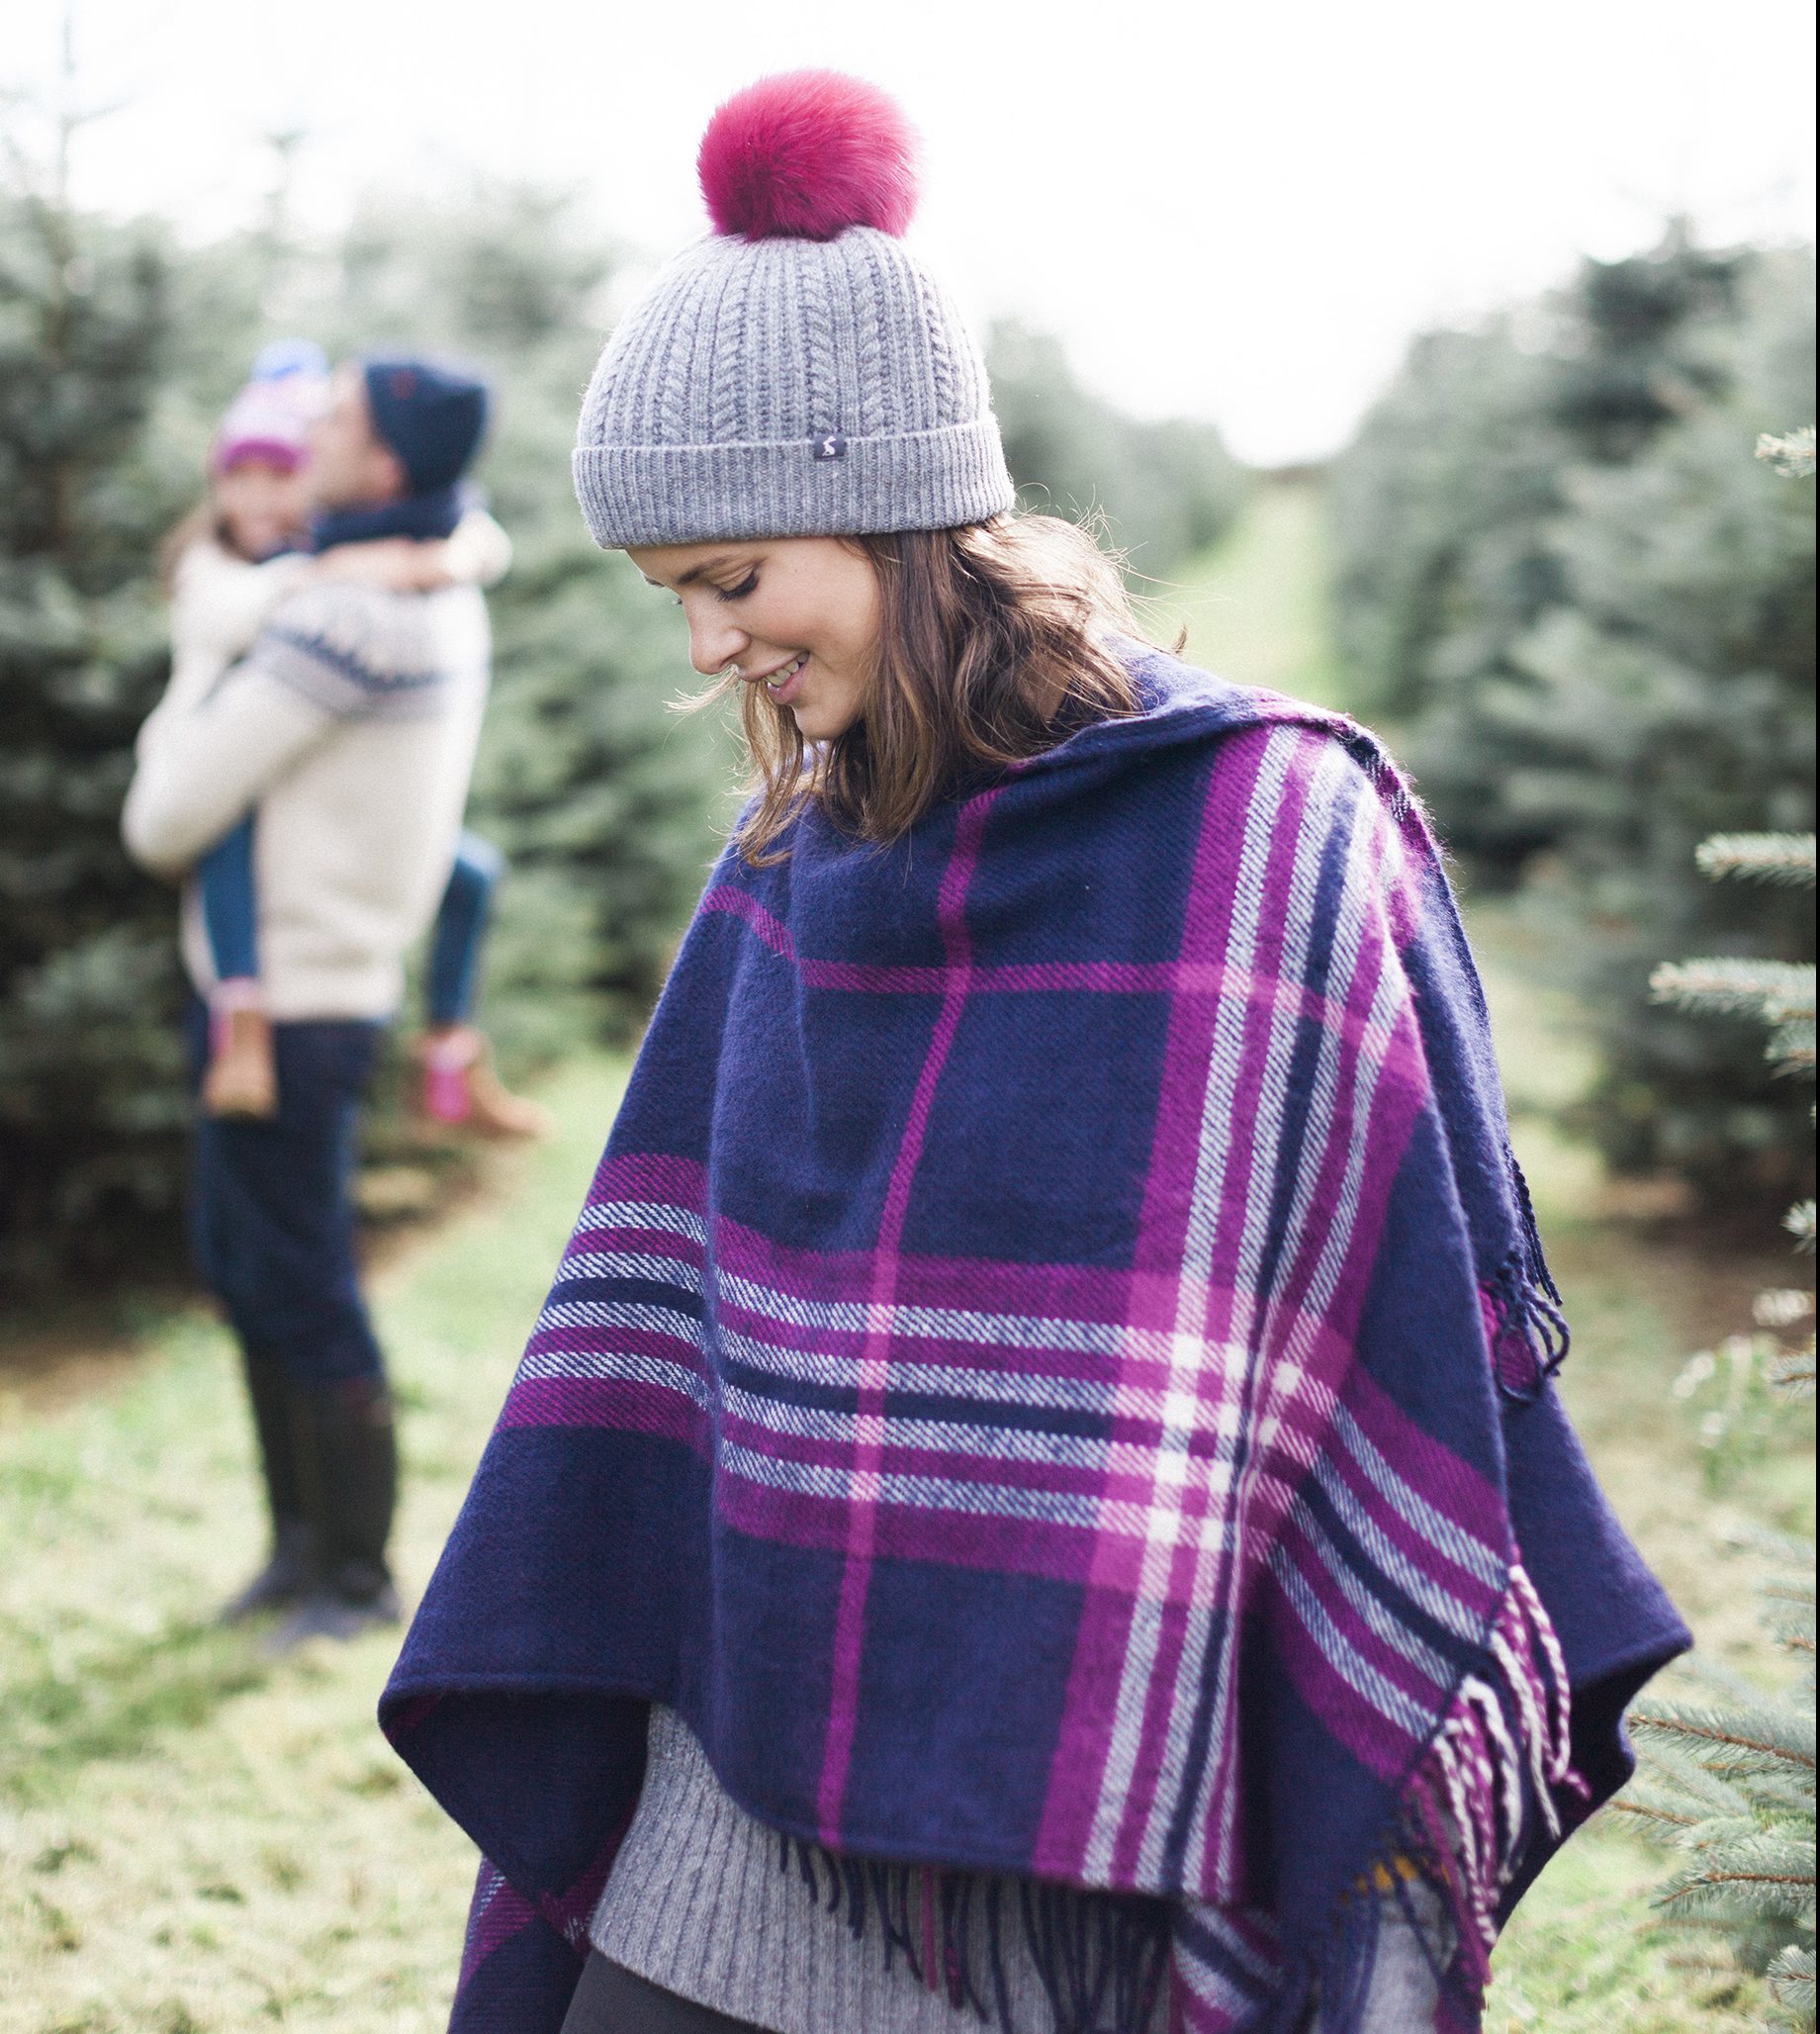 An example of Joules' winter collection.